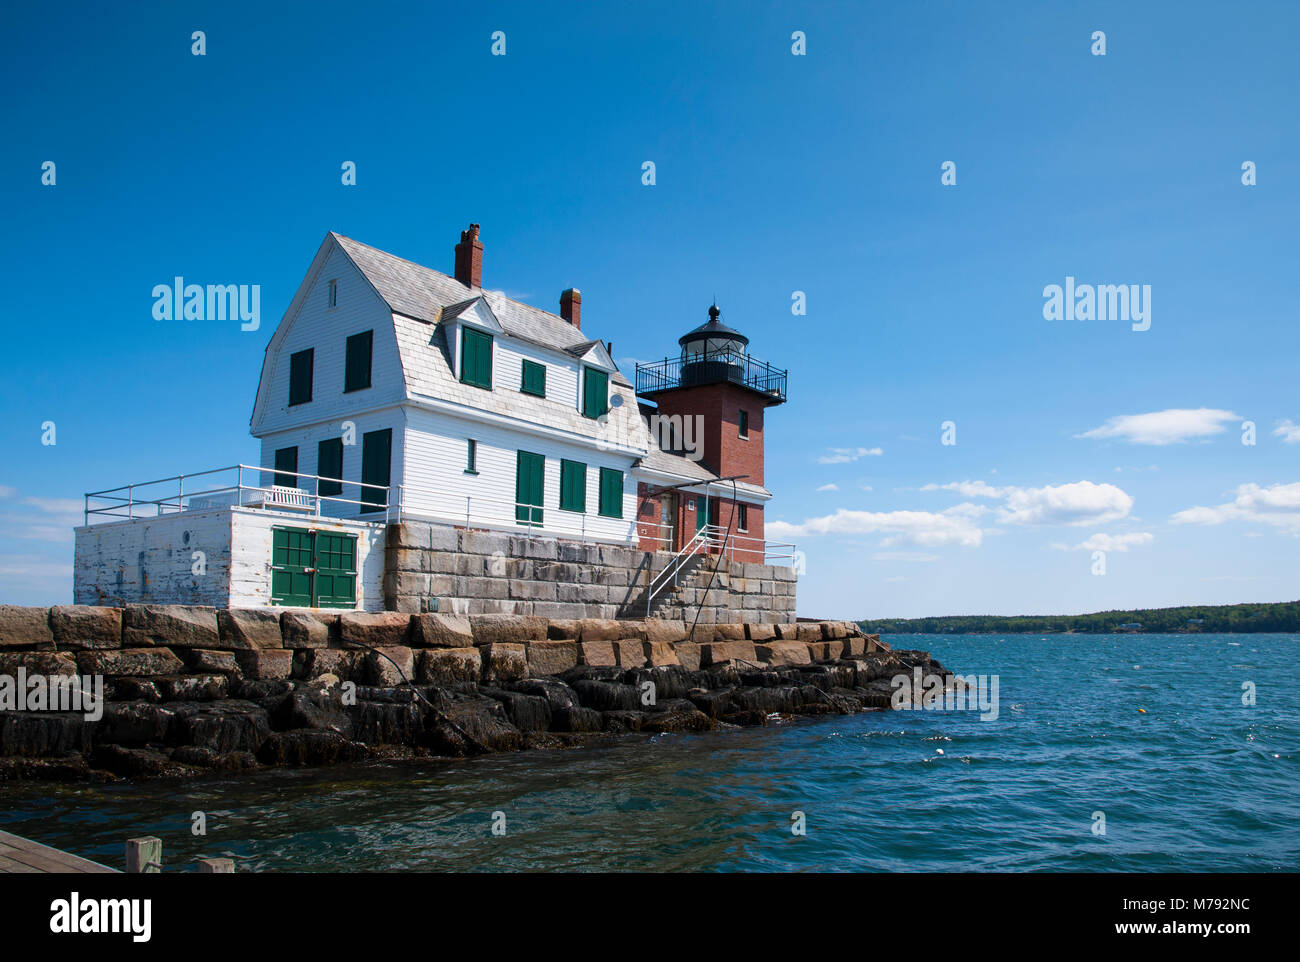 Rockland Breakwter lighthouse with its wooden building and brick tower, sits on the end of a breakwater on a summer day in Maine. Stock Photo